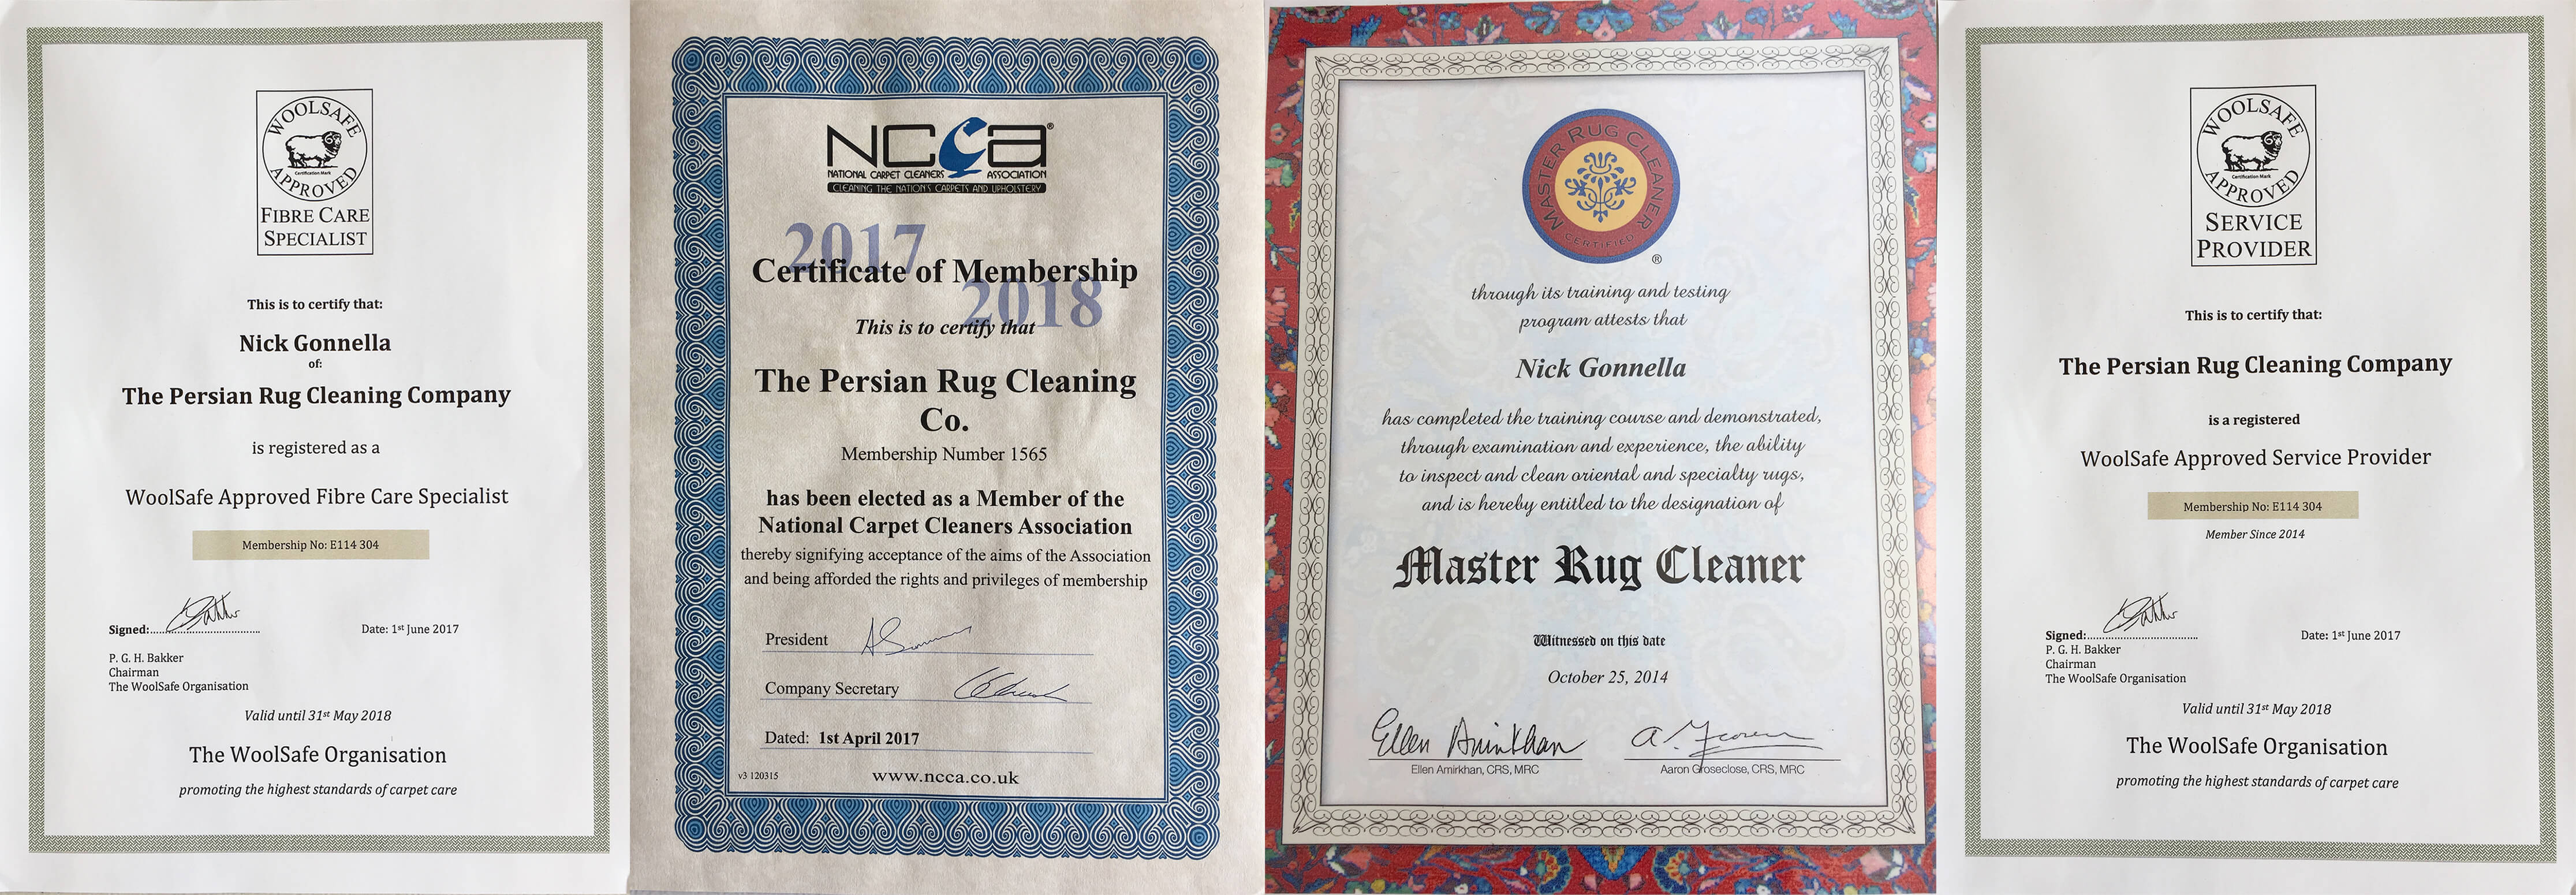 Persian Rug Cleaning Industry Certificates